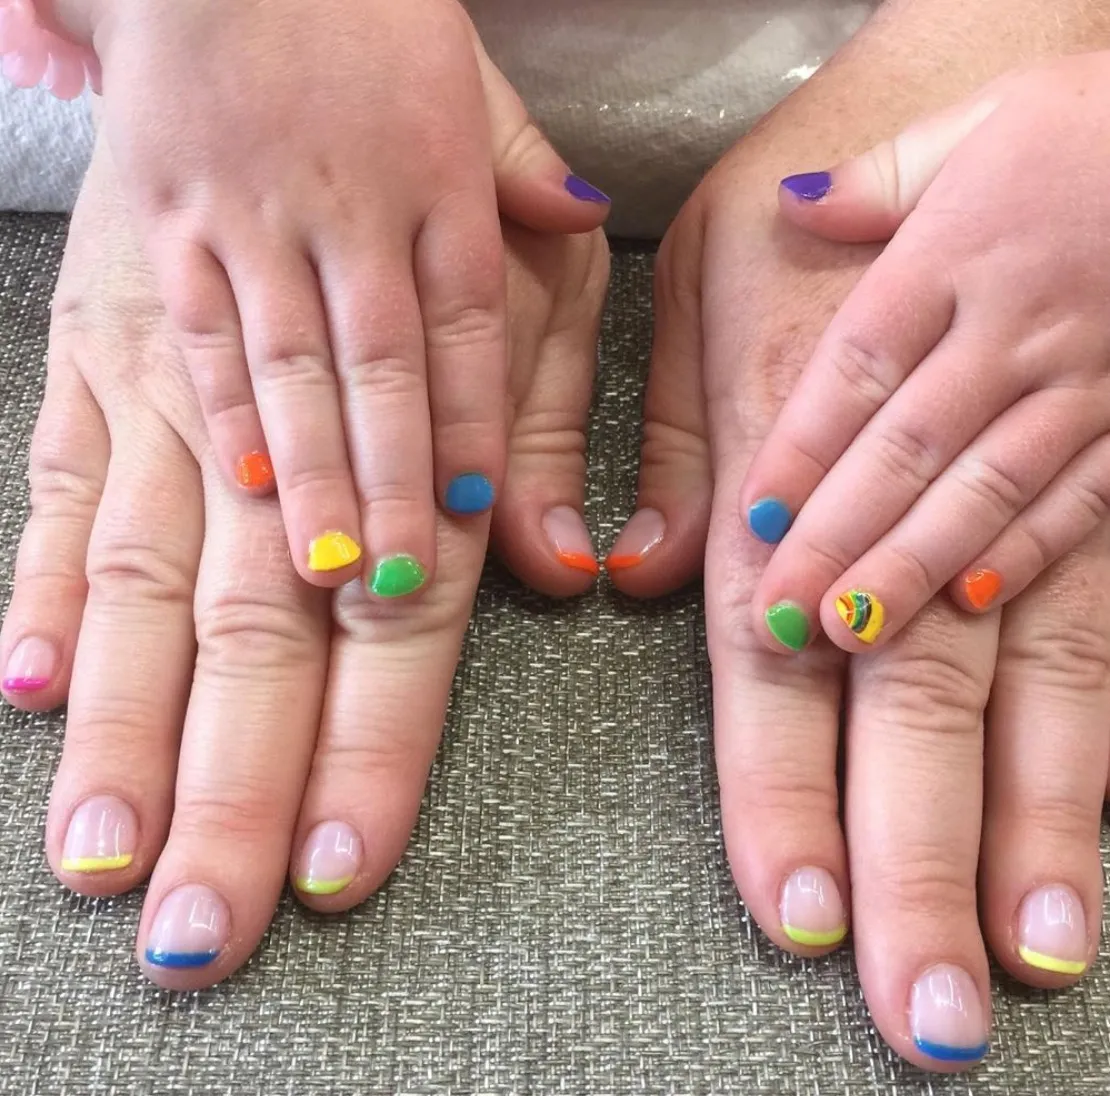 22 Manicure Ideas for May That Usher In the Summer Vibes